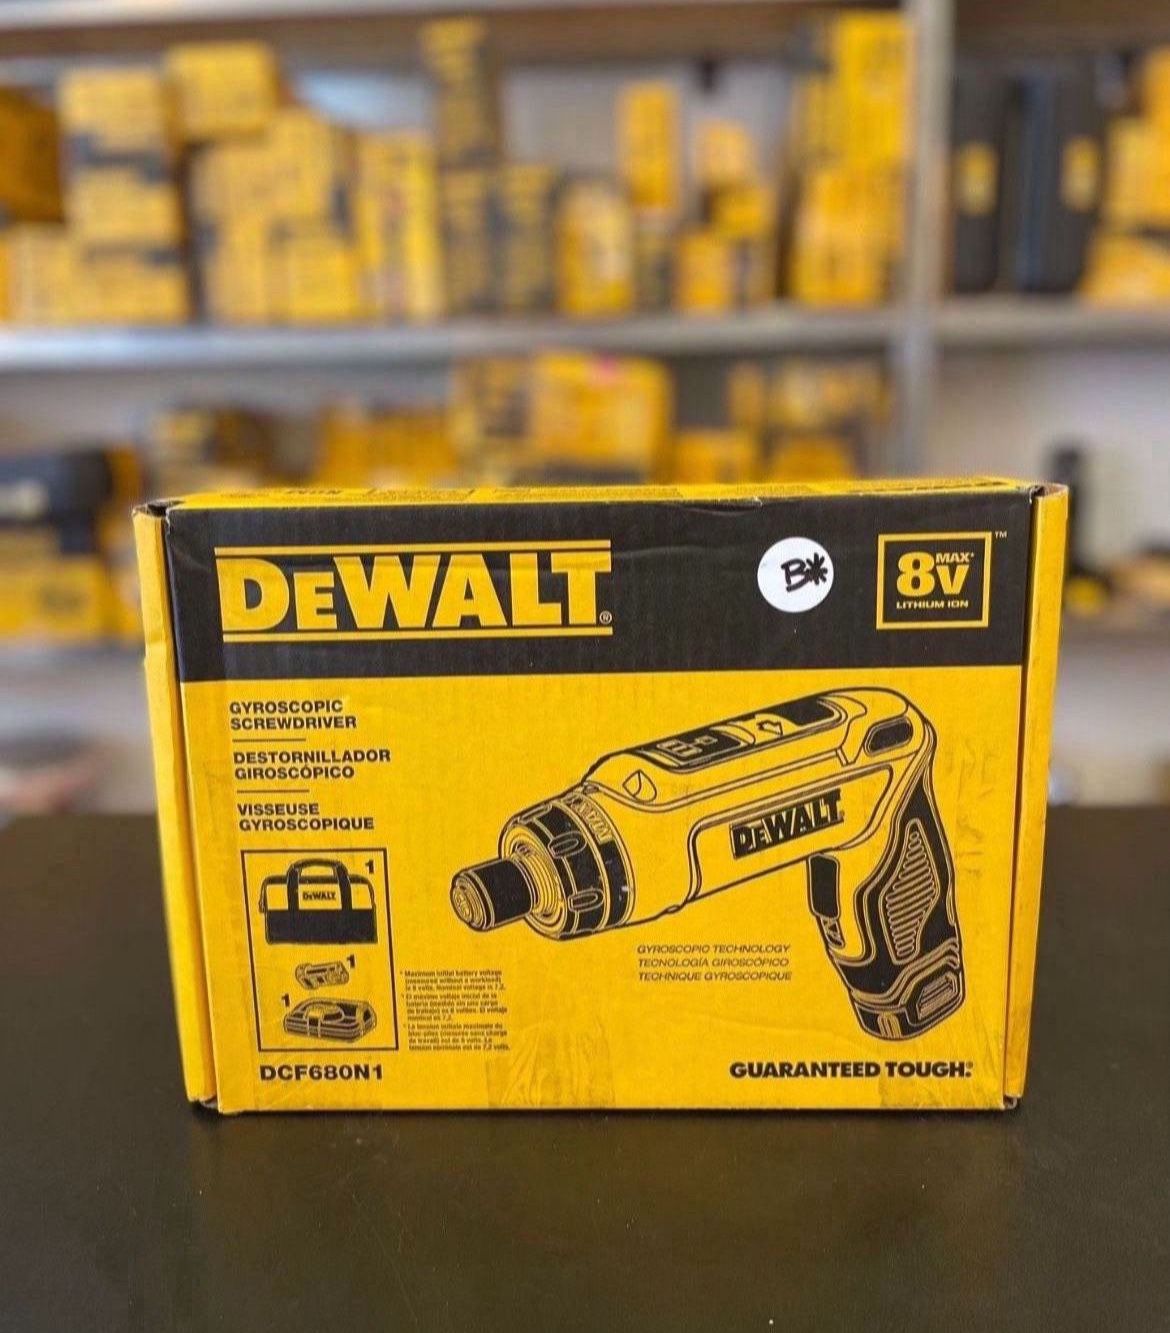 DEWALT 8V MAX Cordless Gyroscopic Screwdriver with Adjustable Handle, (1) 1.0Ah Battery, Charger and Bag DCF680N1